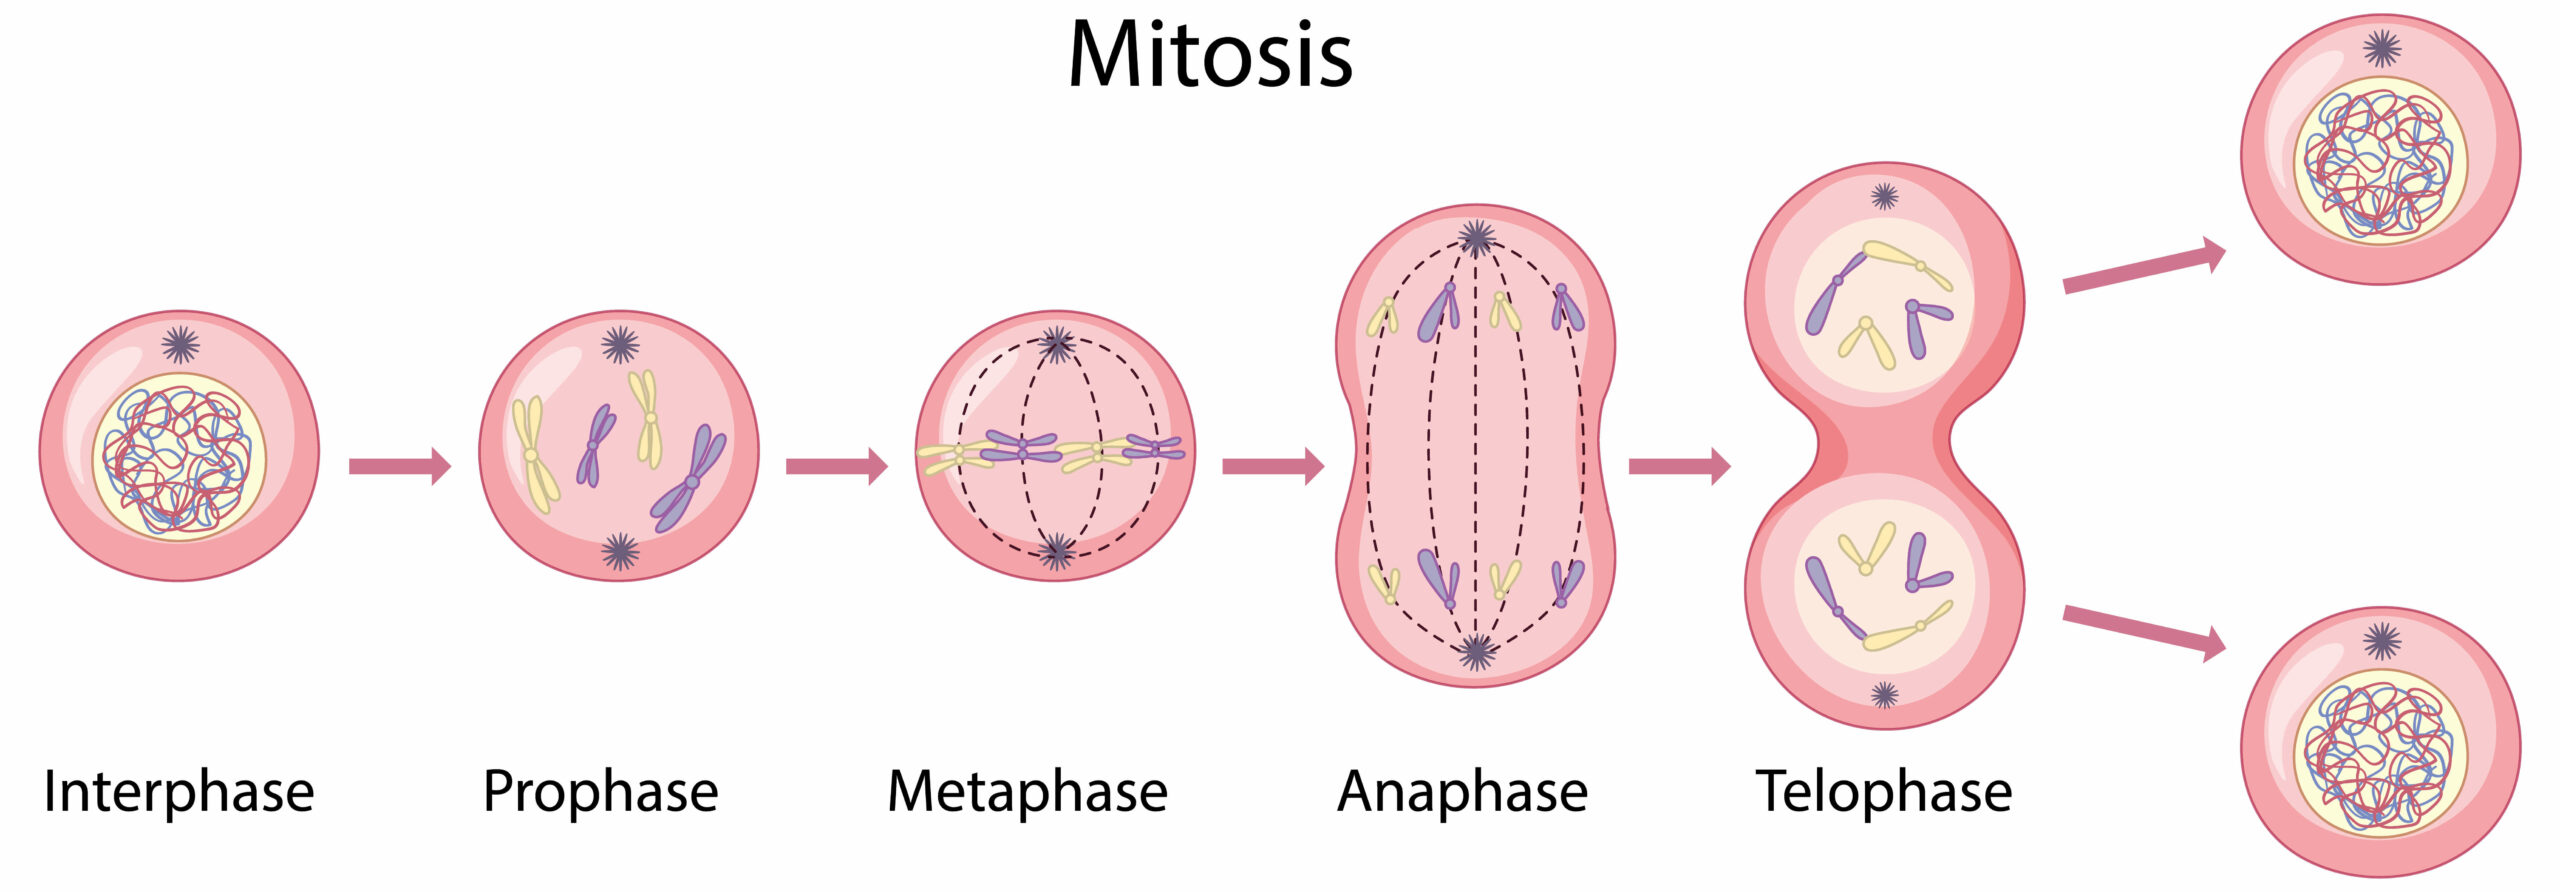 A picture of mitosis